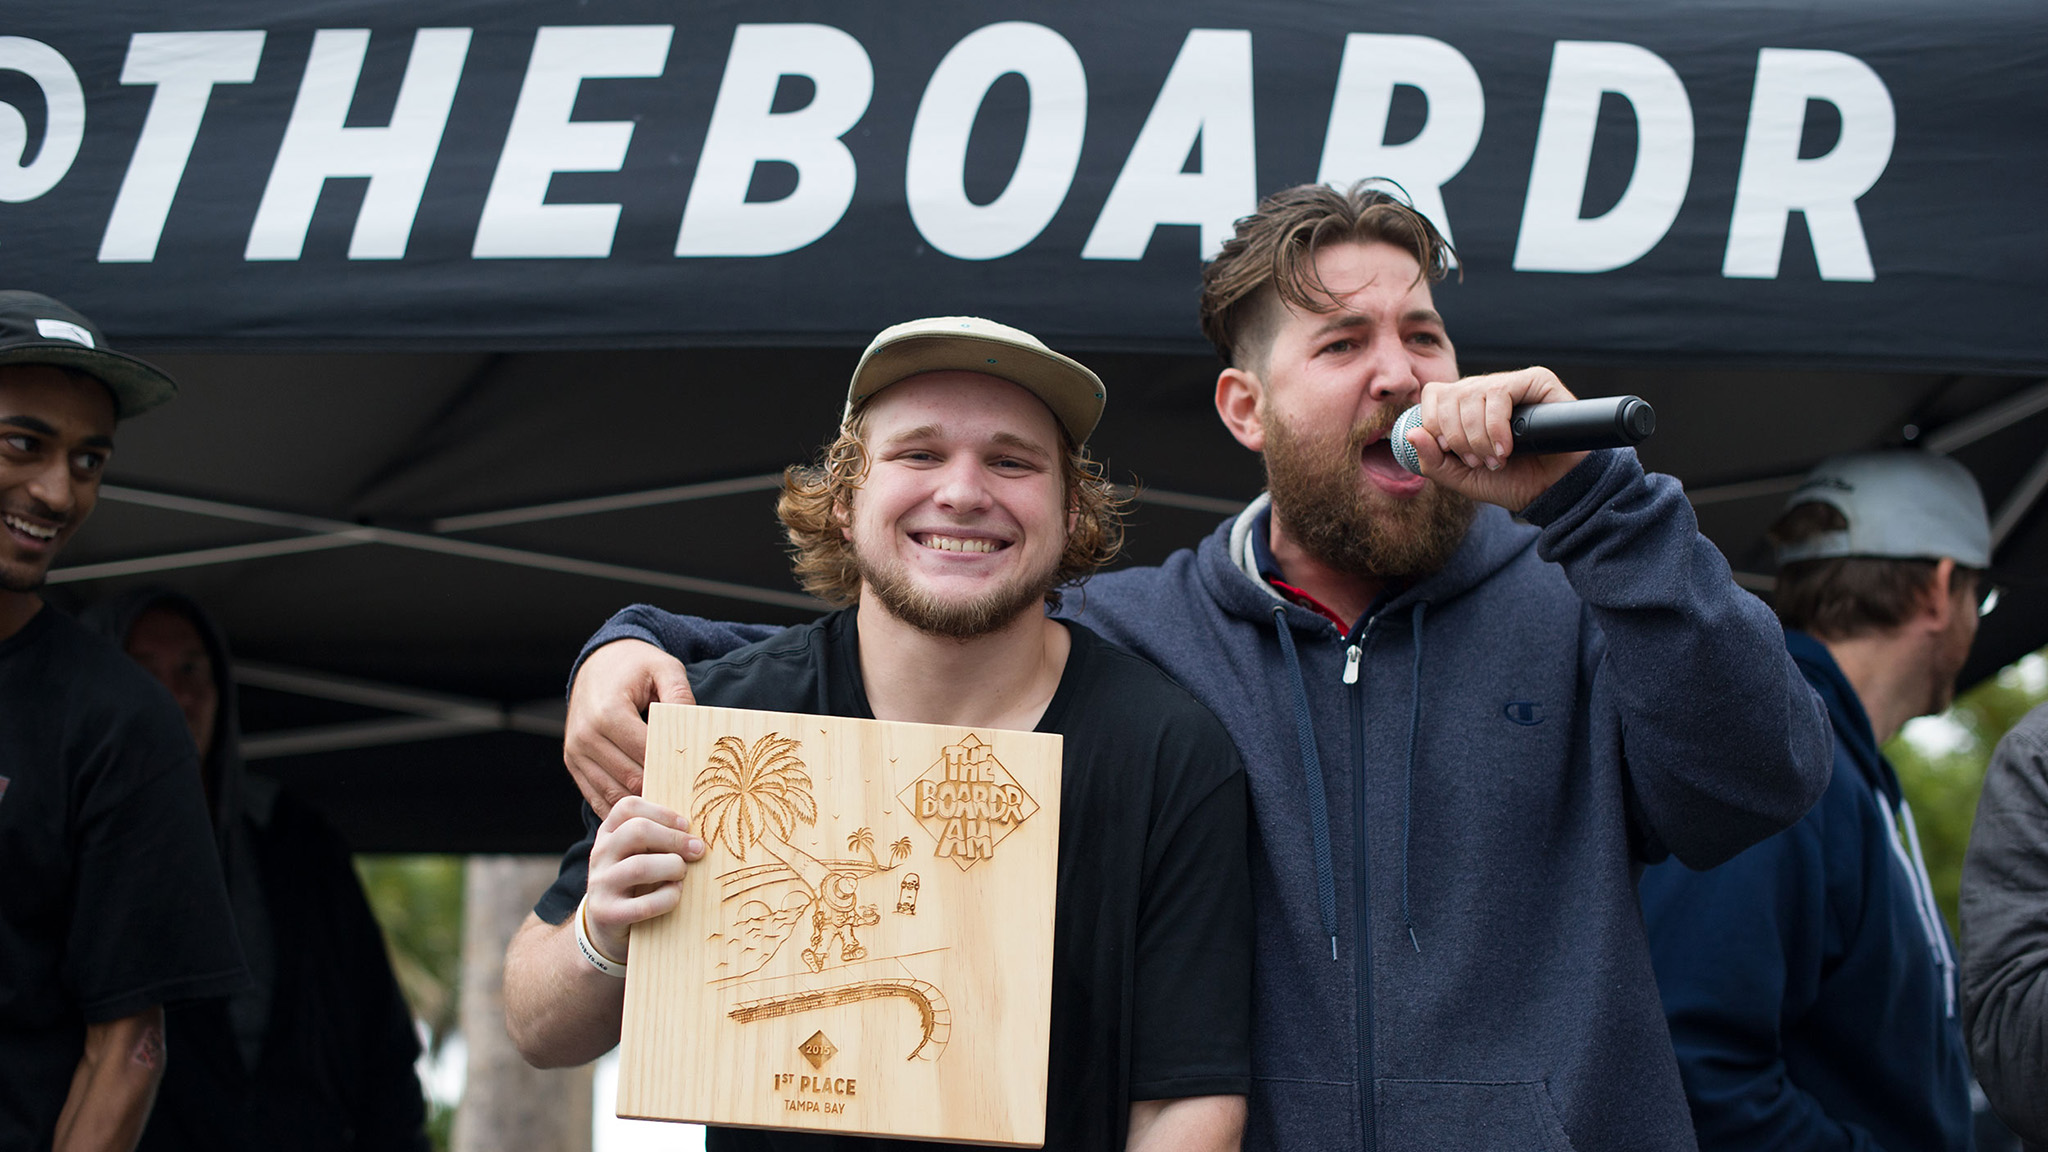 Jamie Foy (left) celebrates his Boardr Am win in 2015 with Boardr announcer Scotty Conley (right).